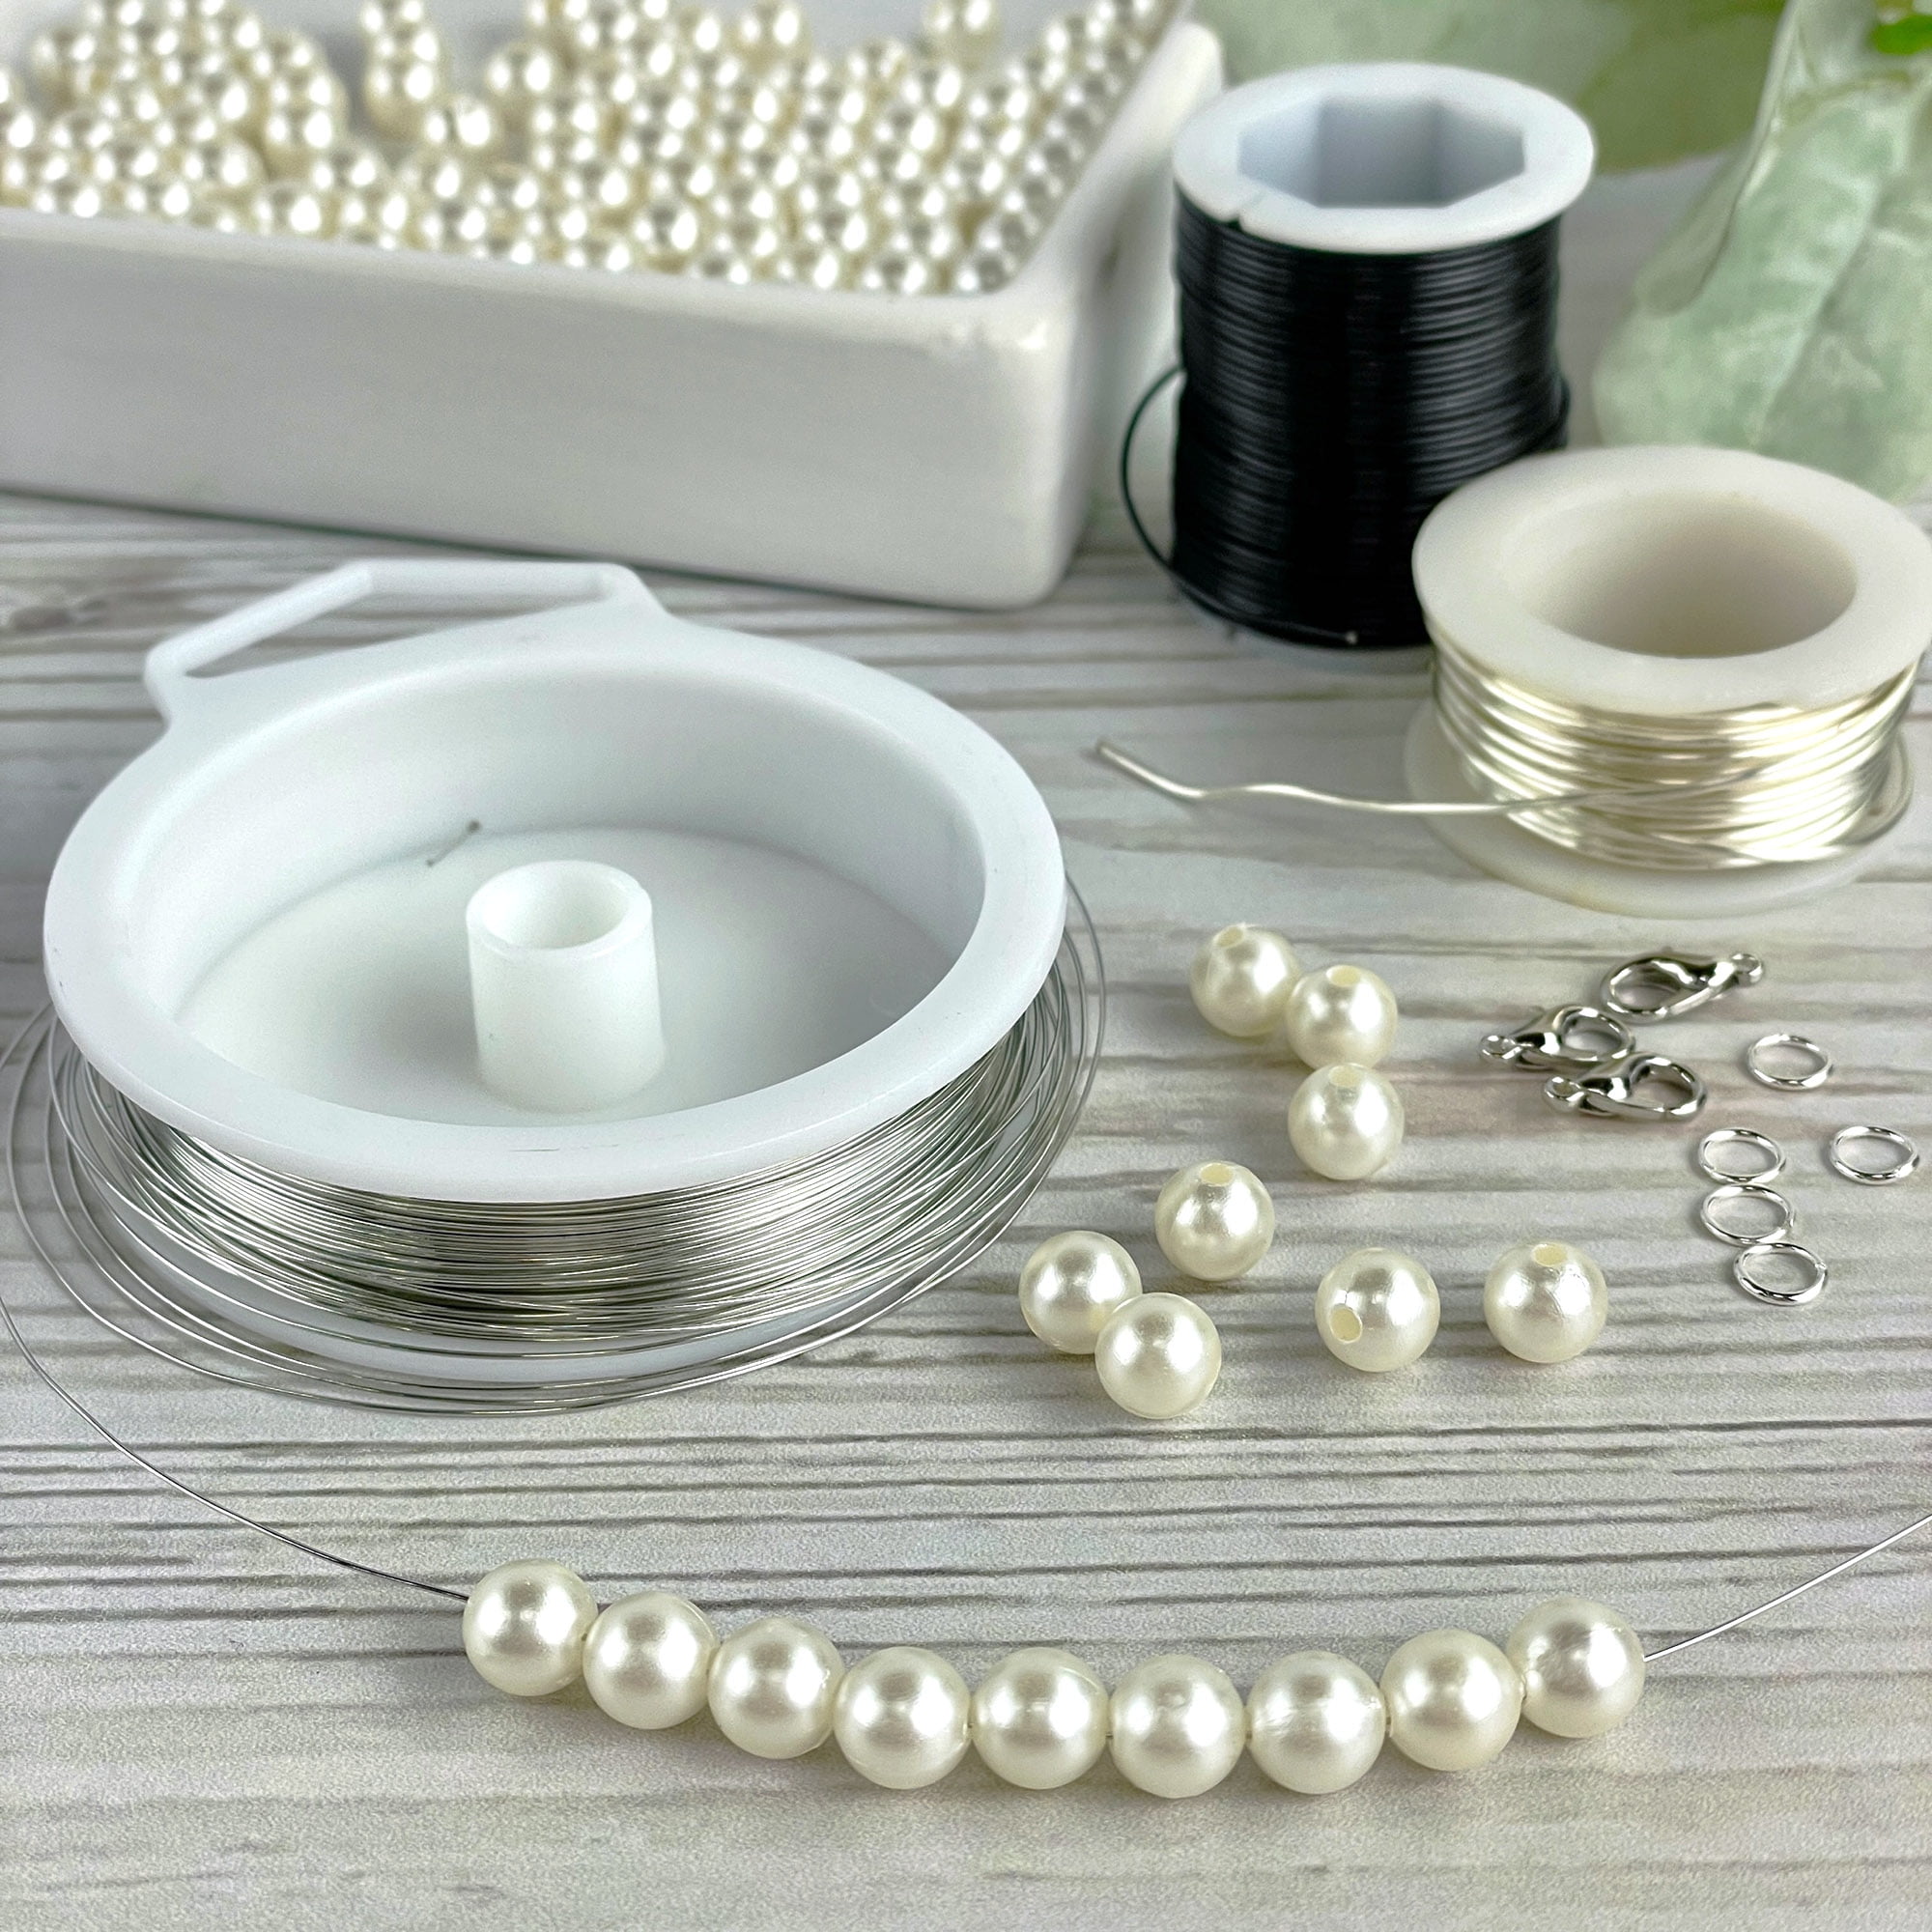 Wholesale Wrinkle Pearl Beads for Jewelry Making - Dearbeads